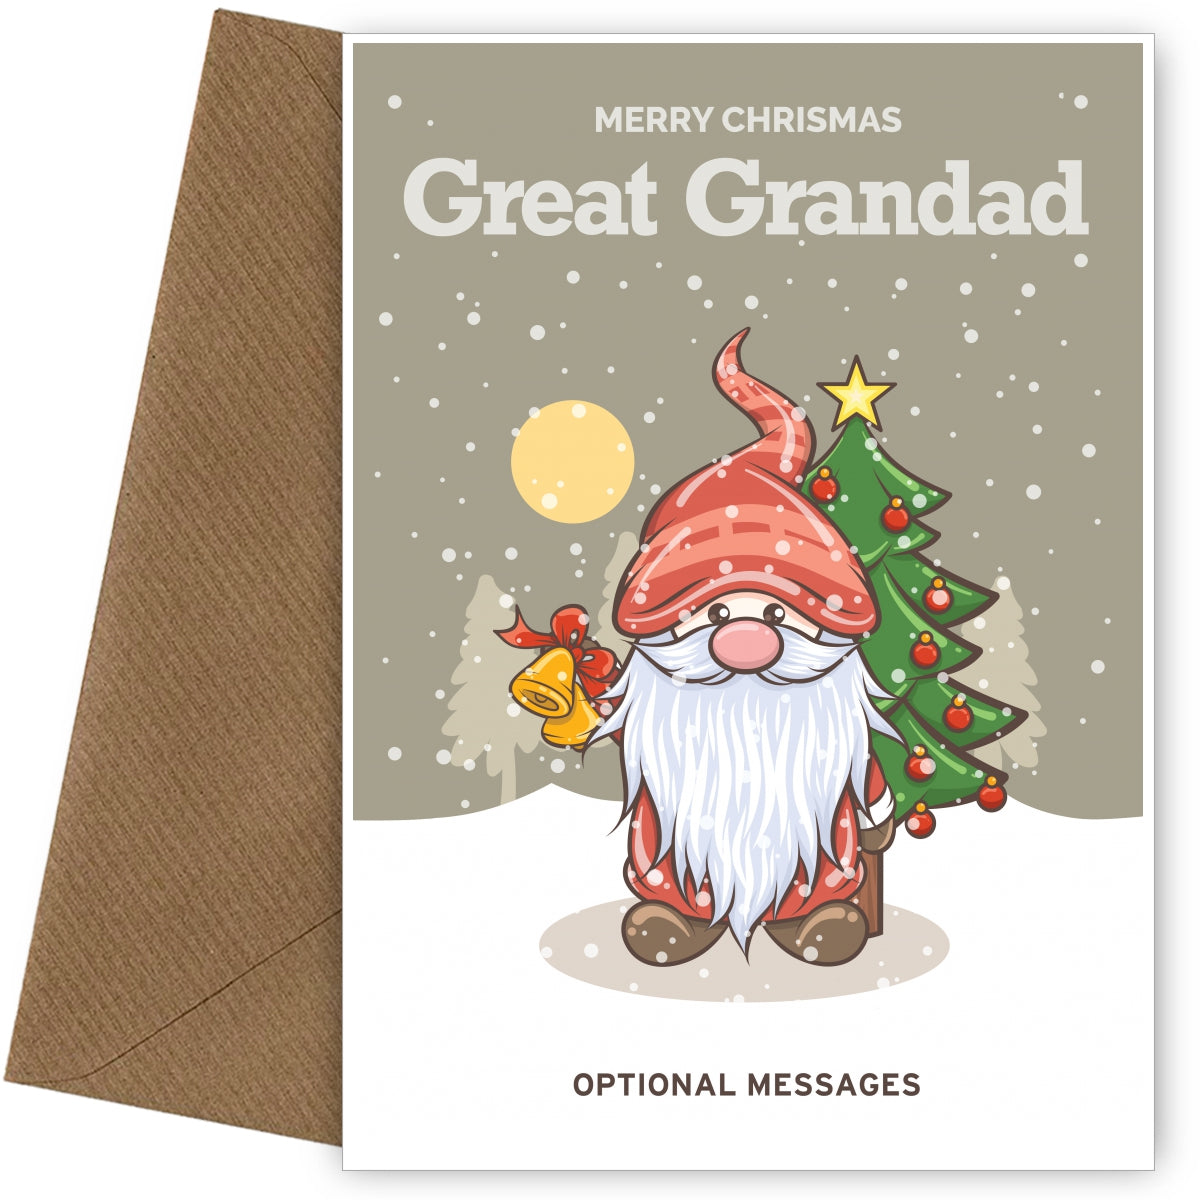 Merry Christmas Card for Great Grandad - Festive Gnome